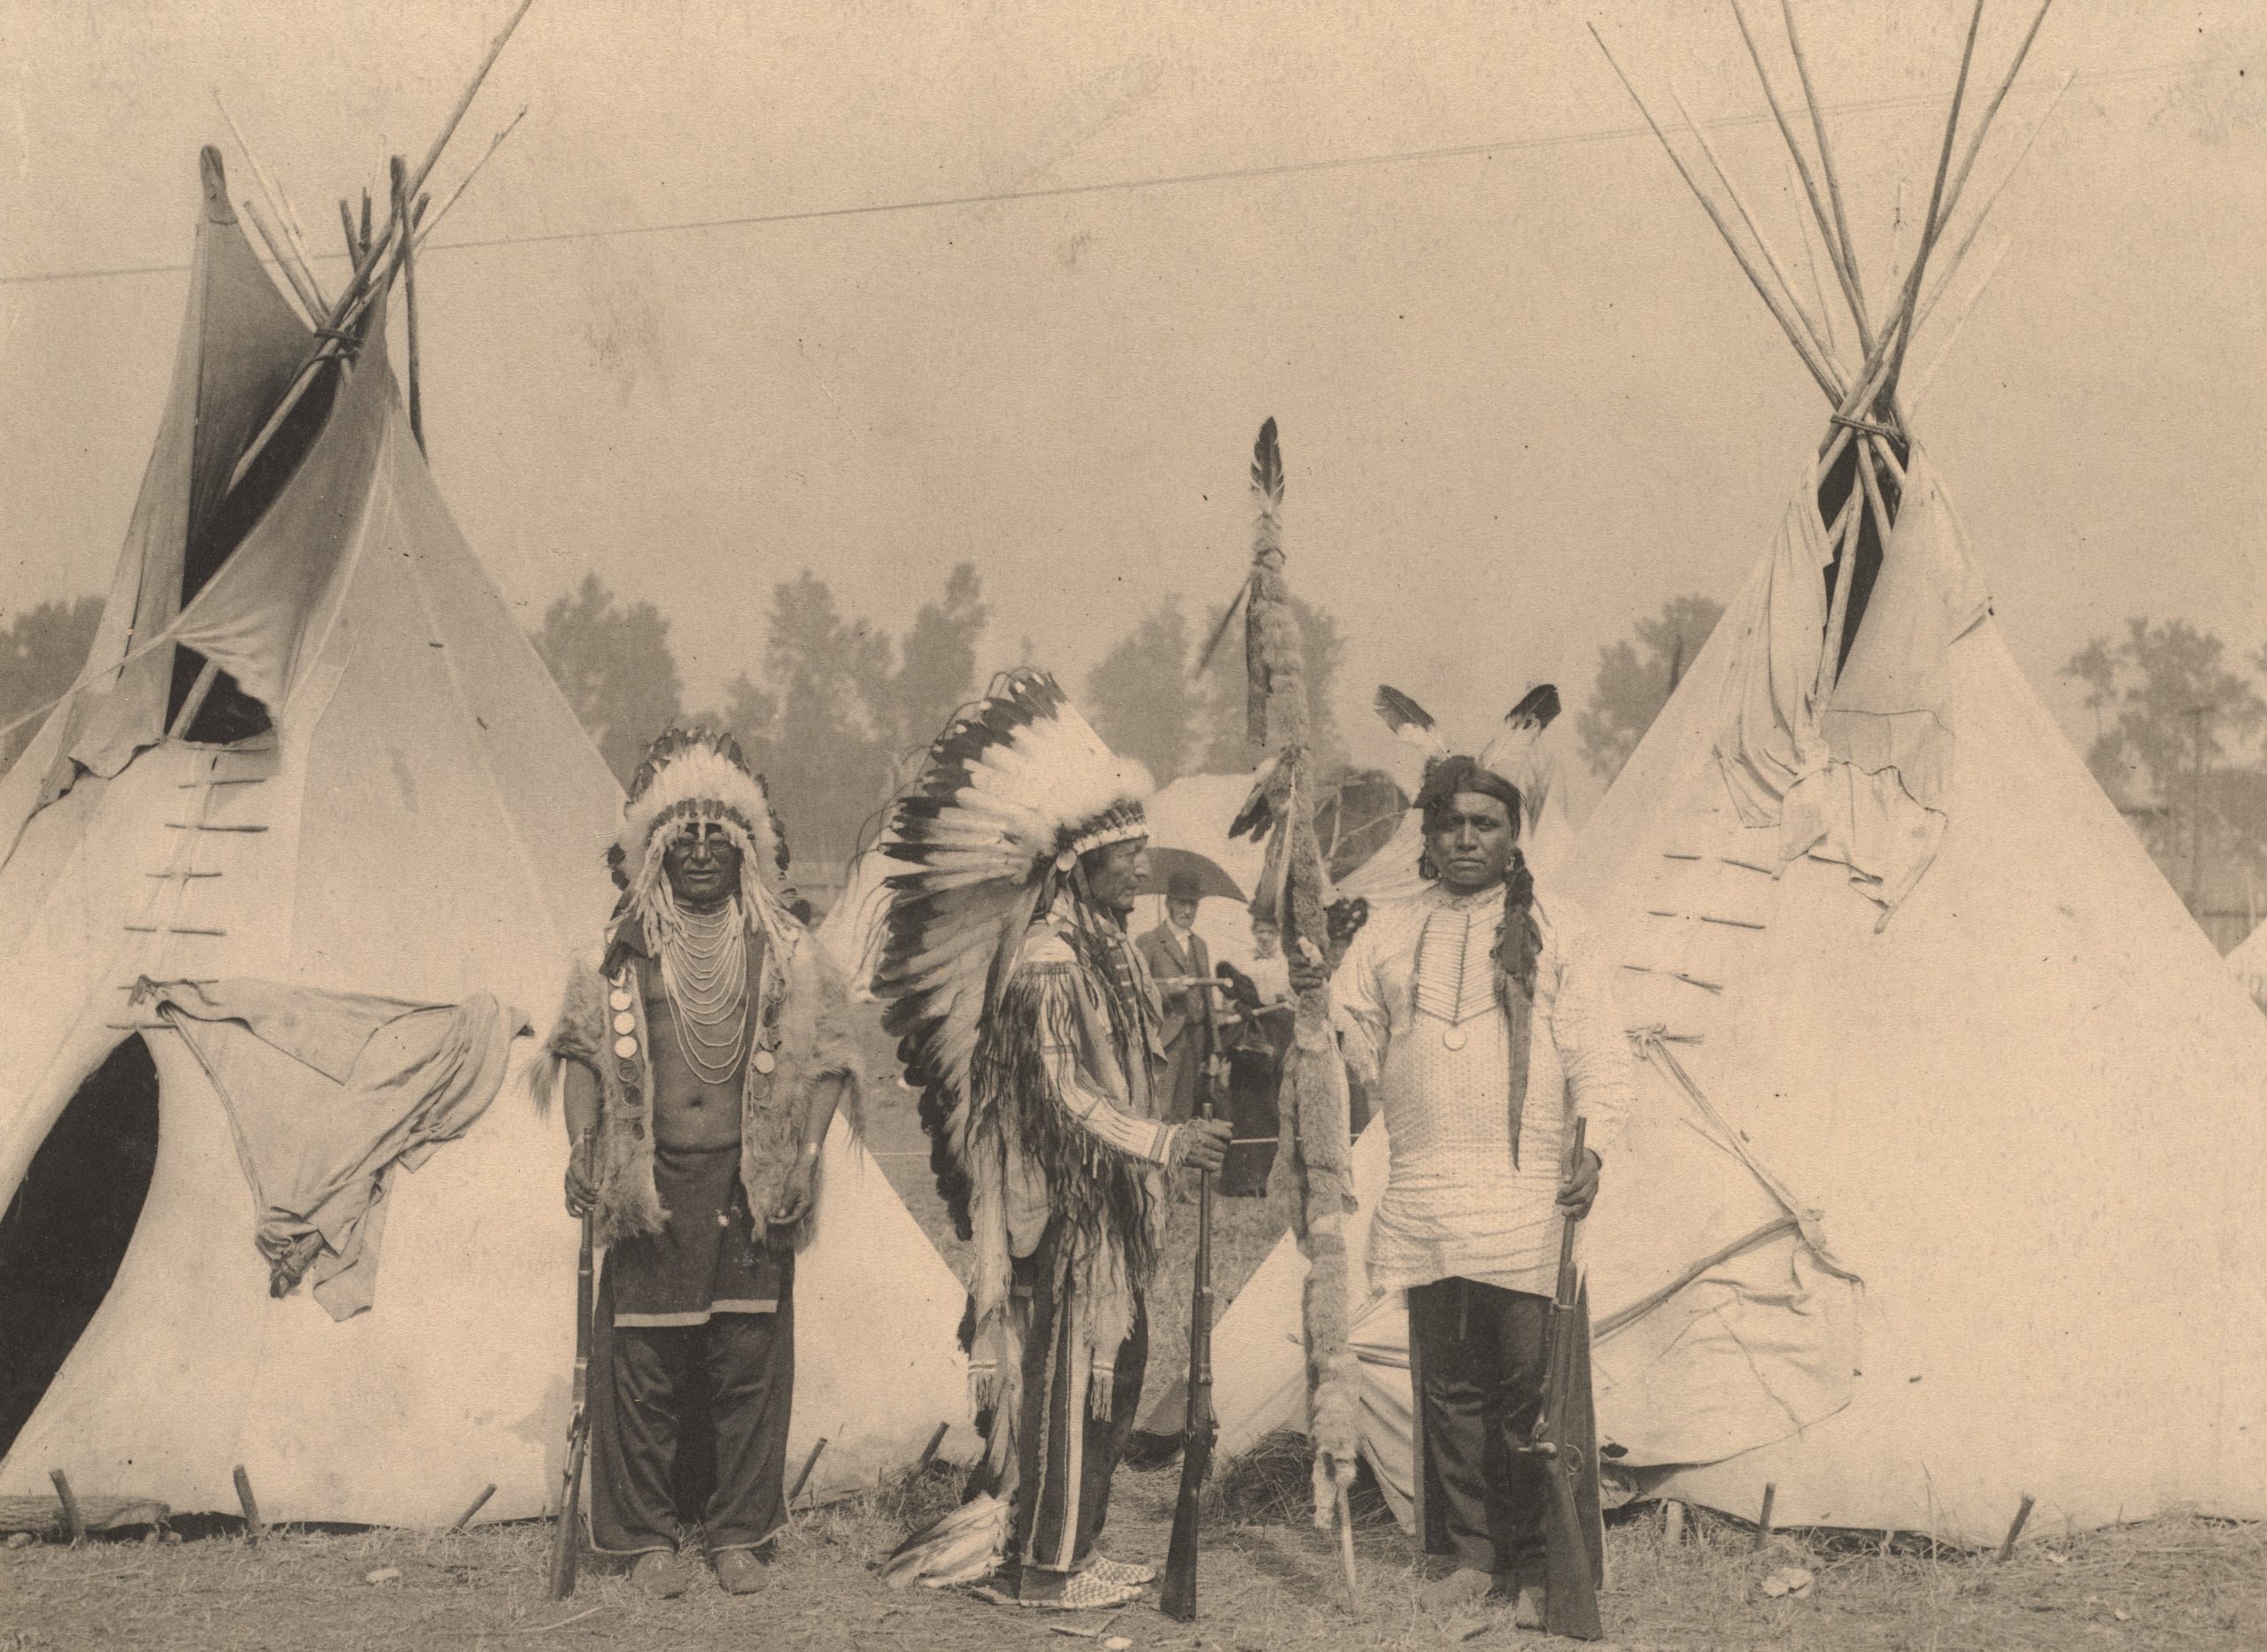 Black Foot, Standing Bear, Big Eagle, Sioux. Three members of the Sioux tribe pose in Indian Village, 1898